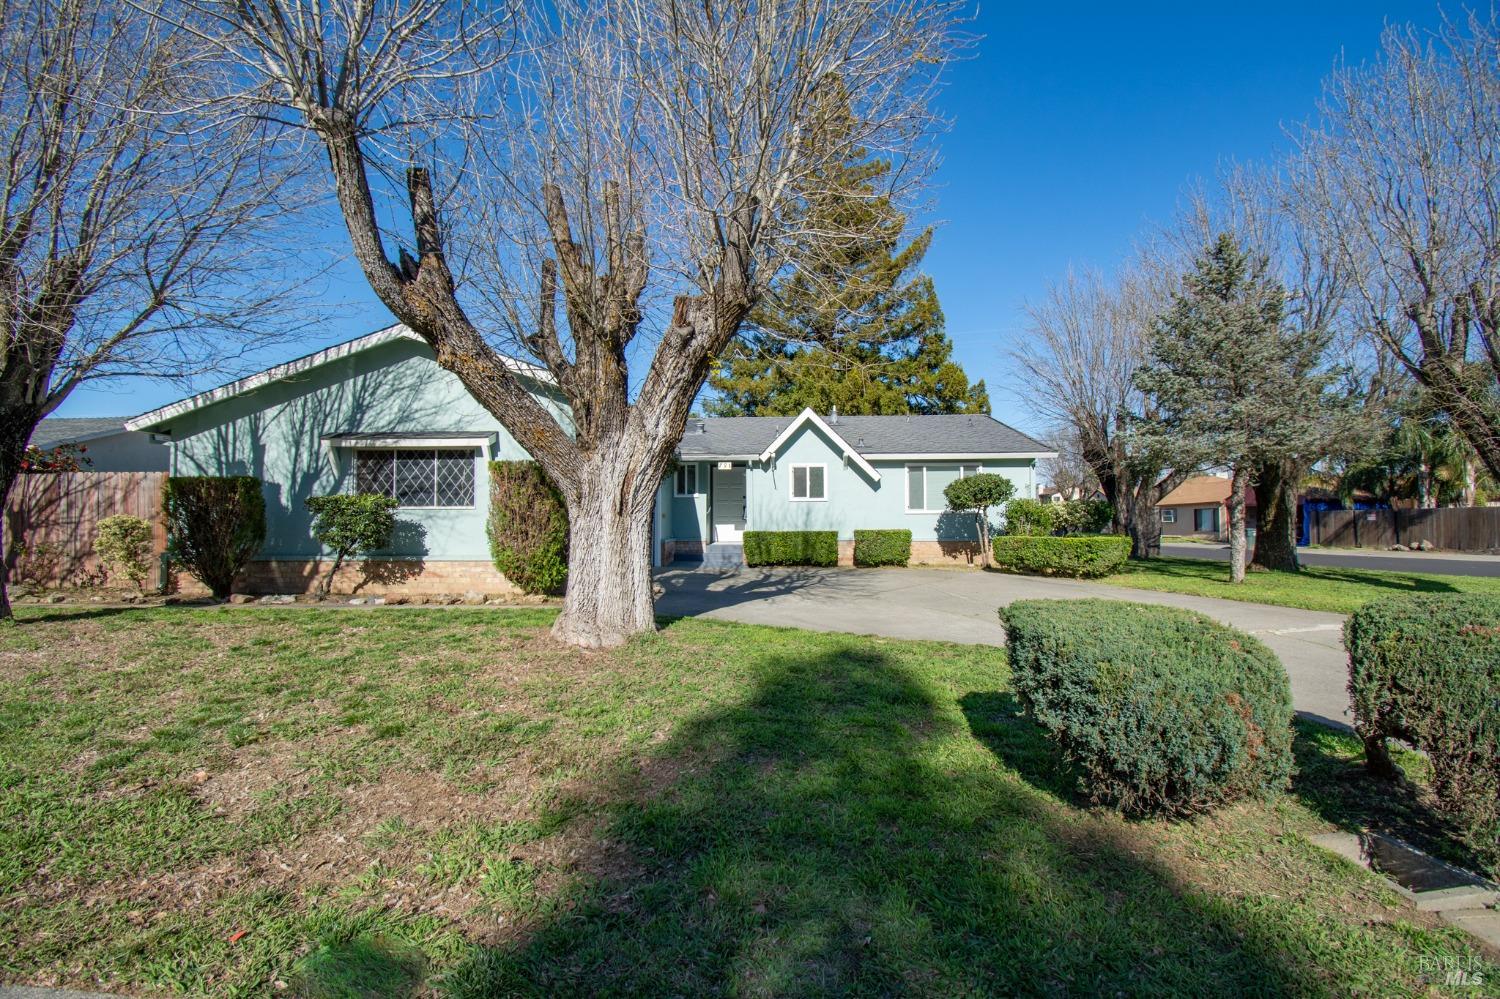 Photo of 791 S Orchard Ave in Vacaville, CA